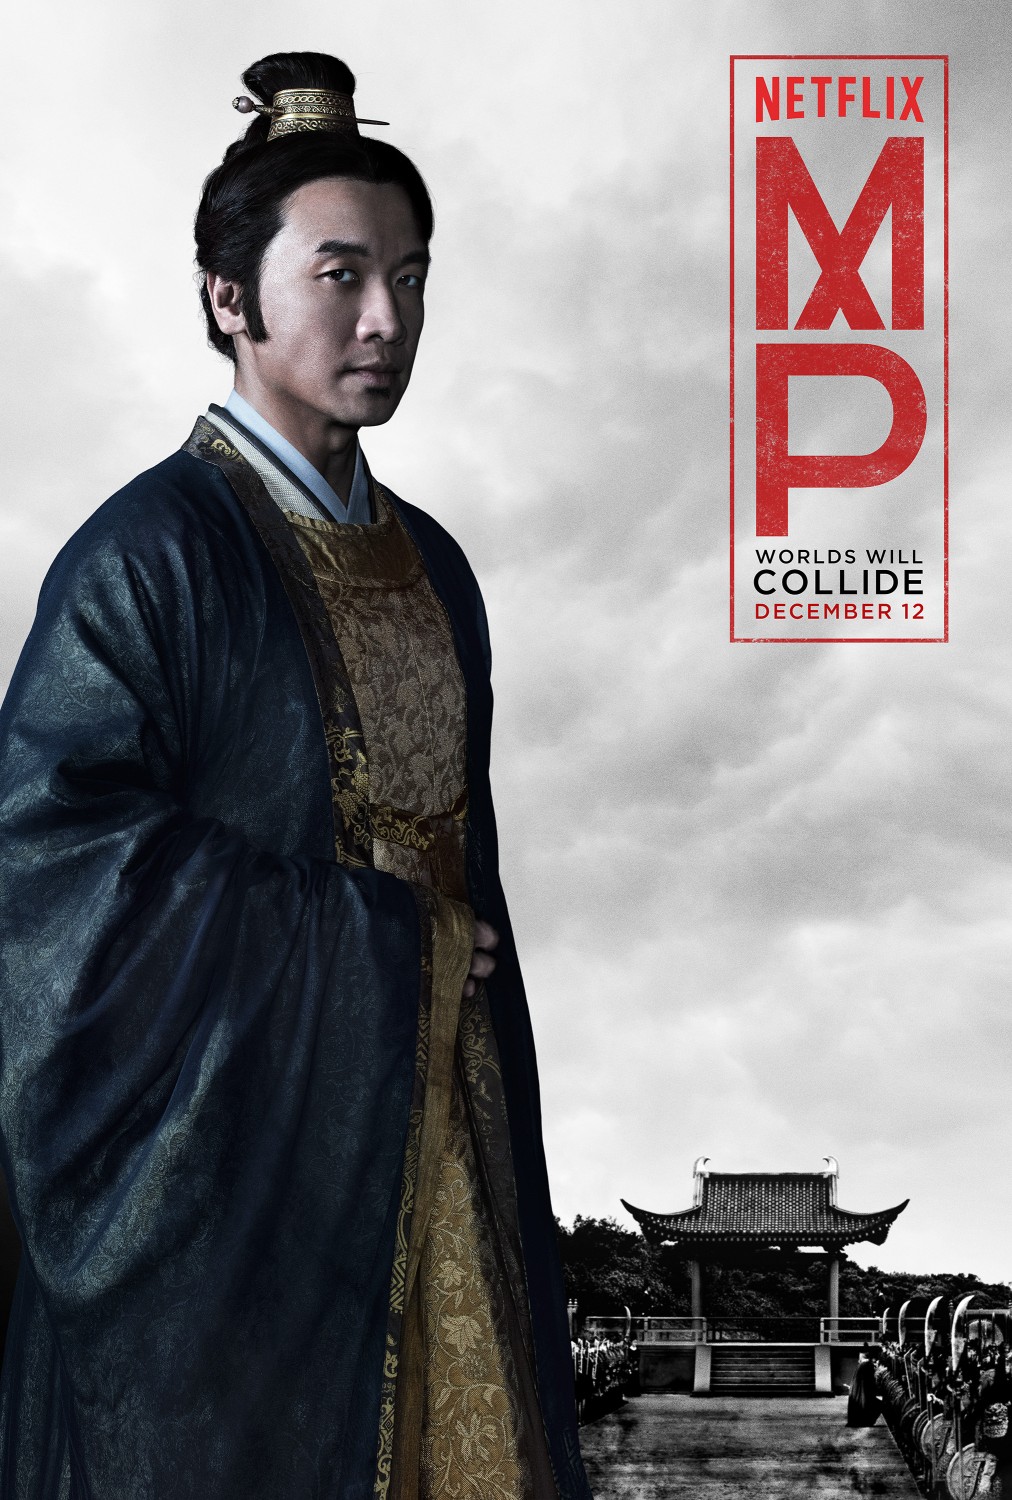 Extra Large TV Poster Image for Marco Polo (#5 of 12)